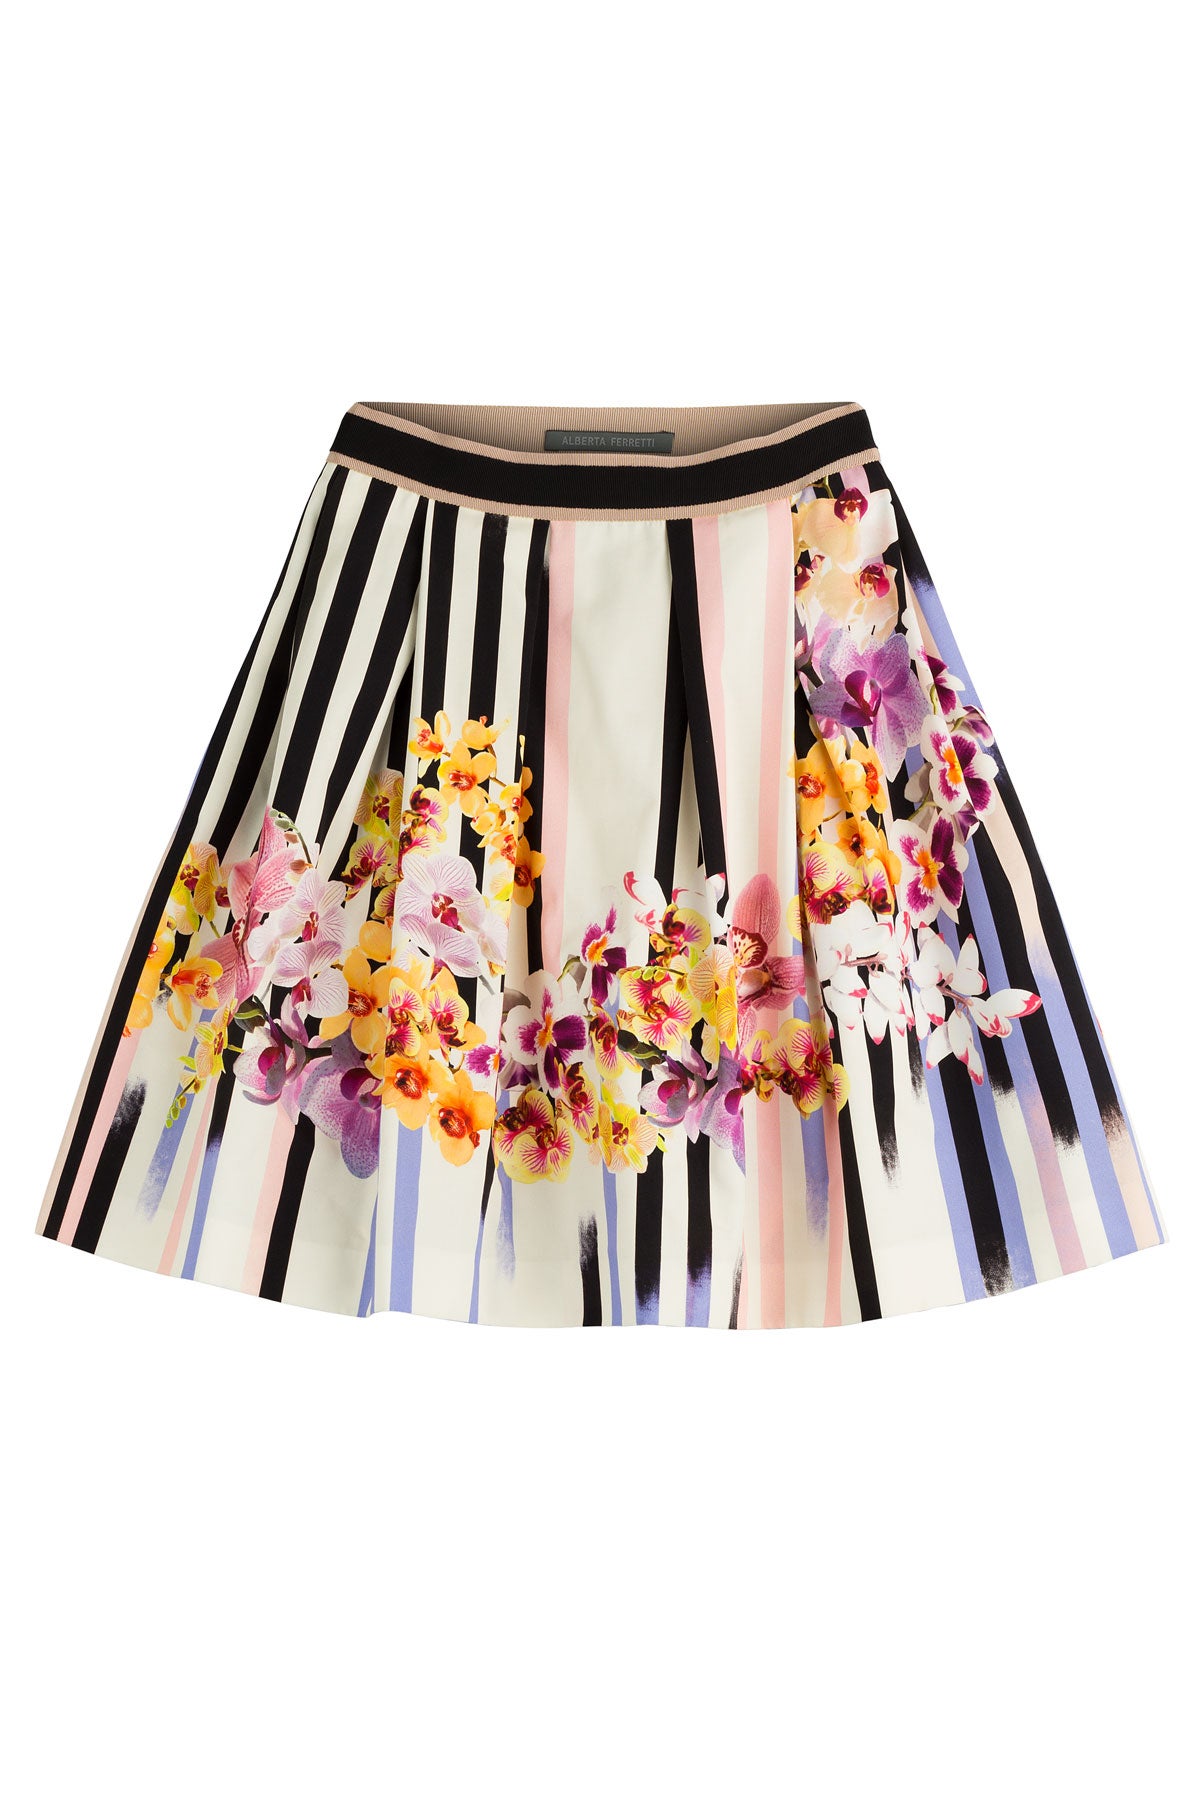 30 Skirts That Would Make a Perfect Addition to Your Summer Ensemble ...